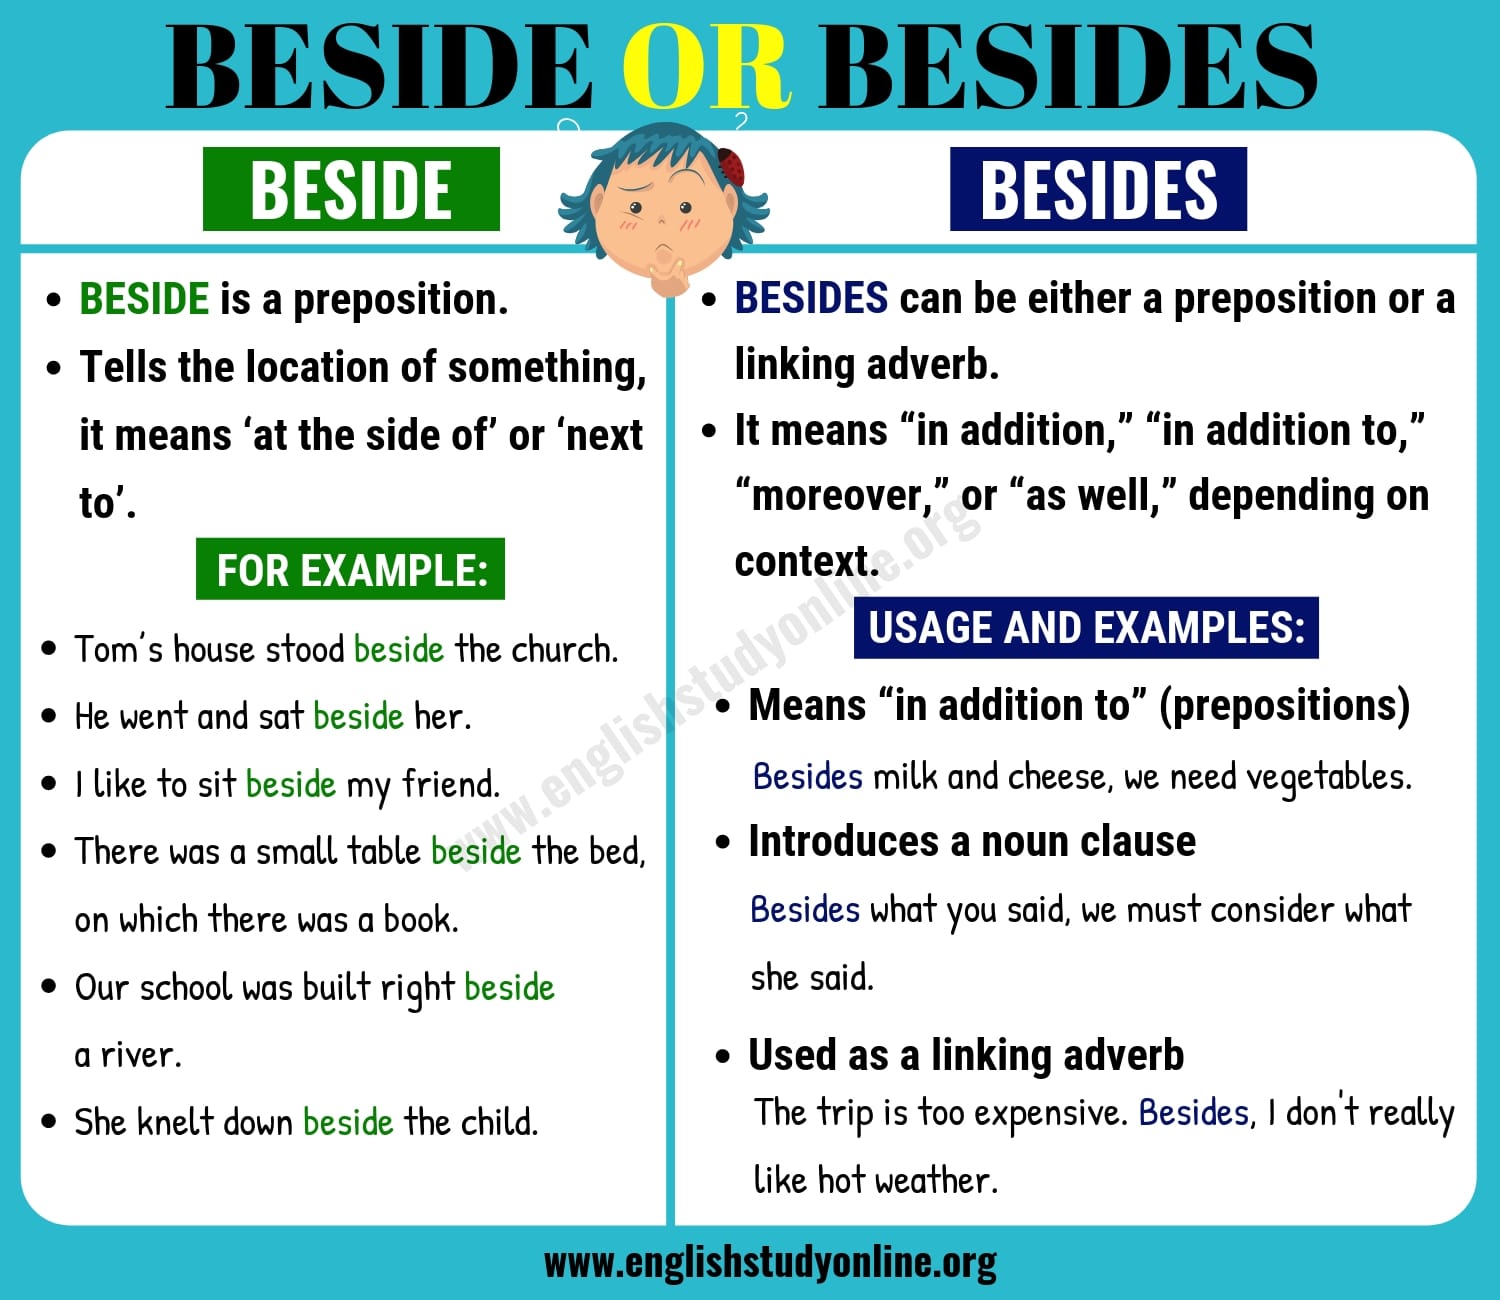 Beside or Besides: What’s the Difference? |nfographic Зомби Ферма